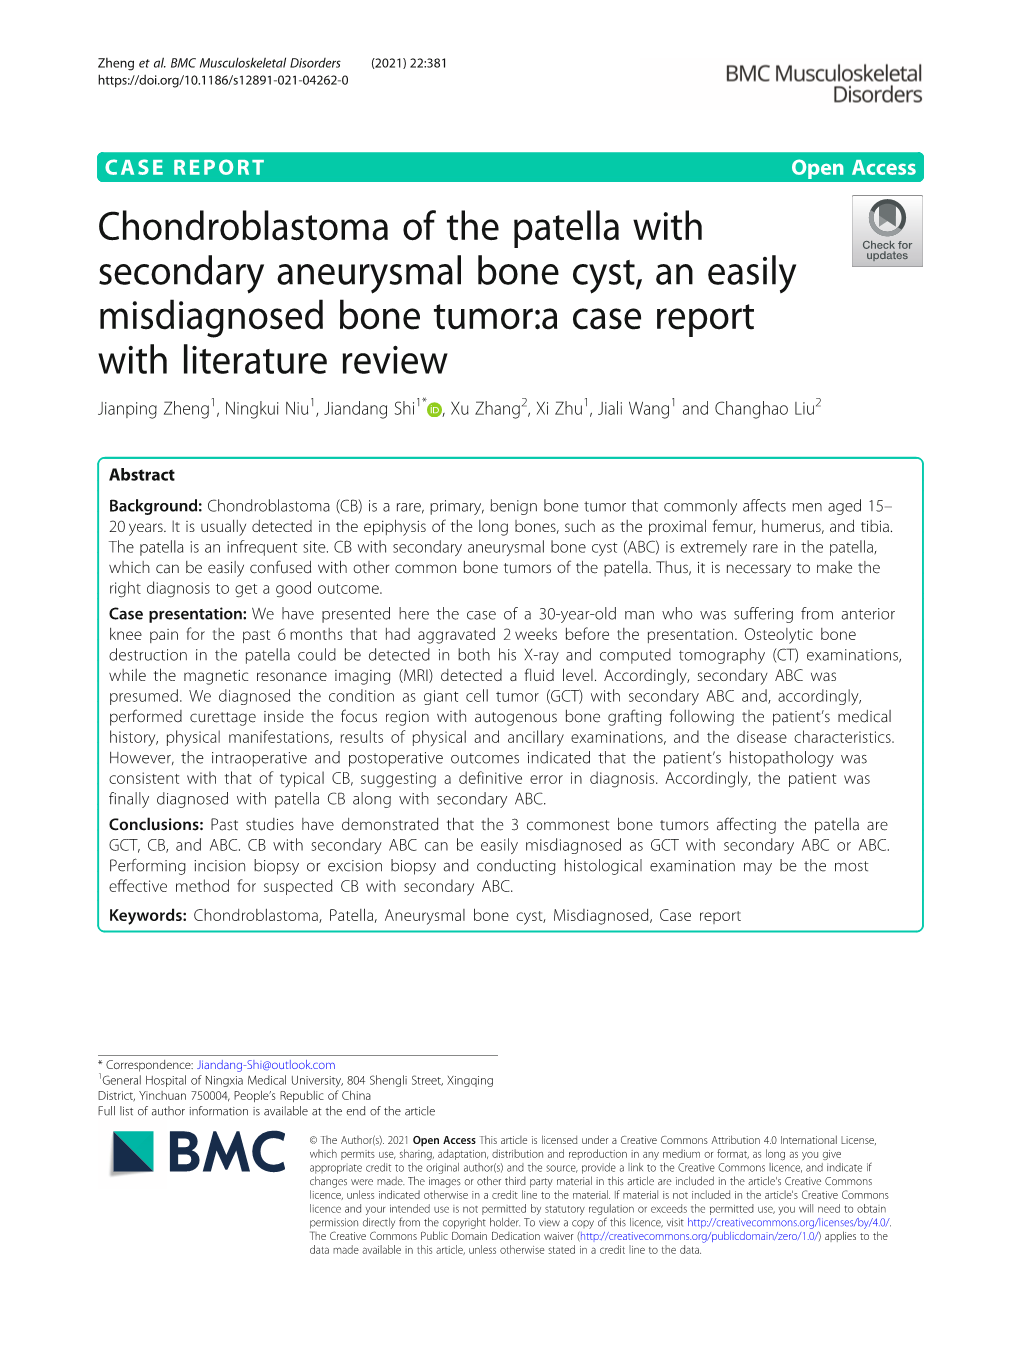 Chondroblastoma of the Patella with Secondary Aneurysmal Bone Cyst, an Easily Misdiagnosed Bone Tumor:A Case Report with Literat